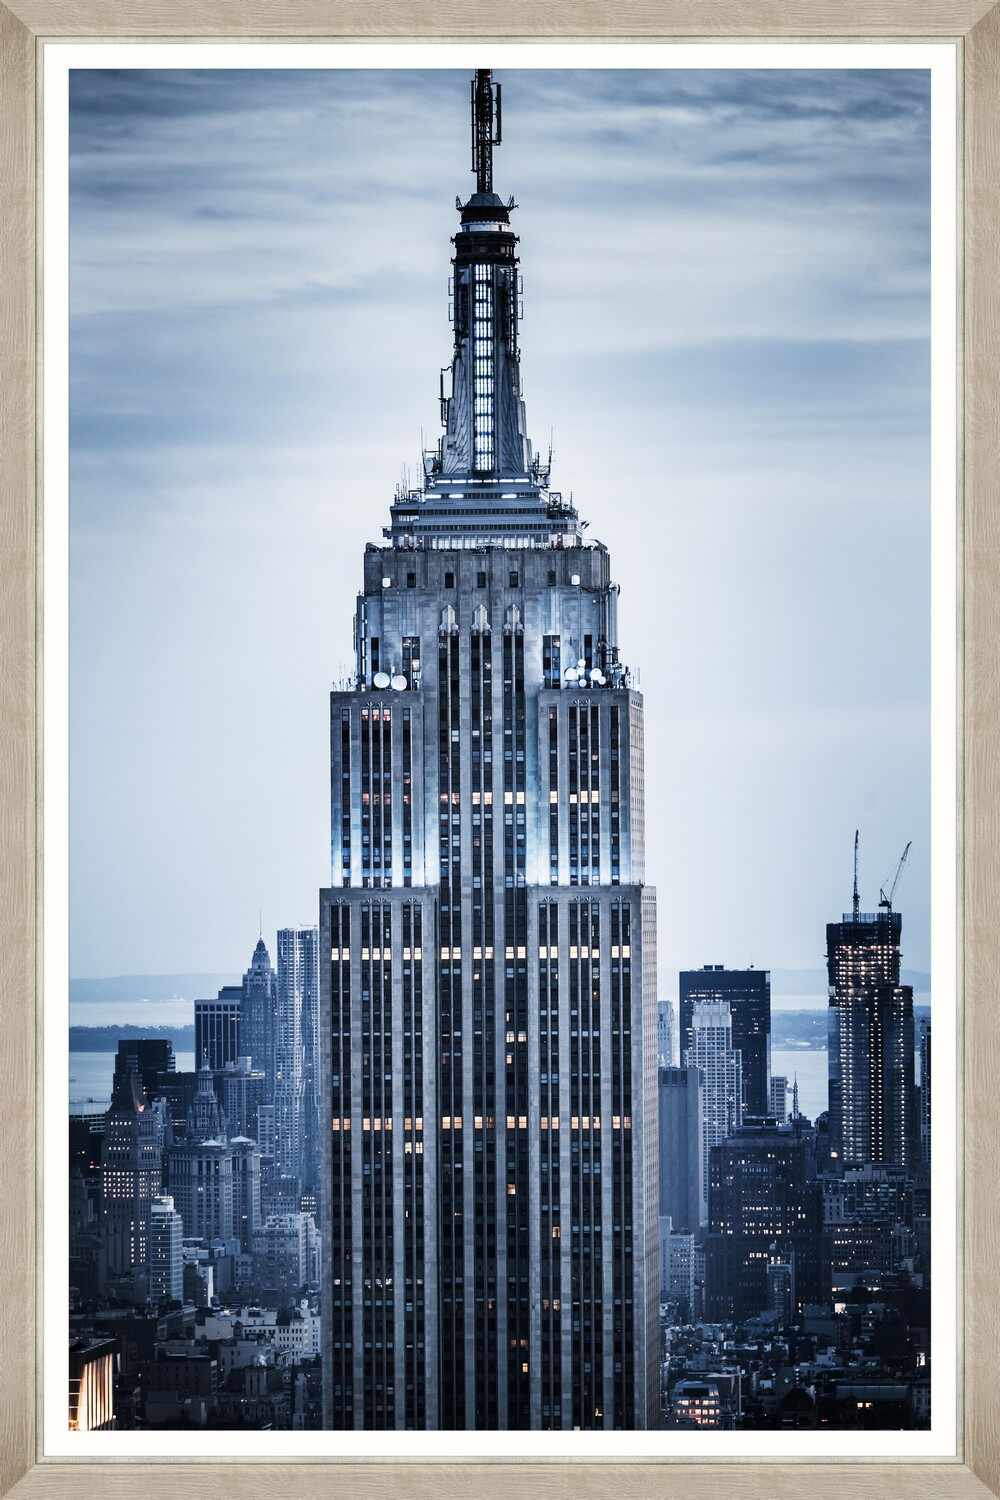 Tablou Framed Art Great Empire State